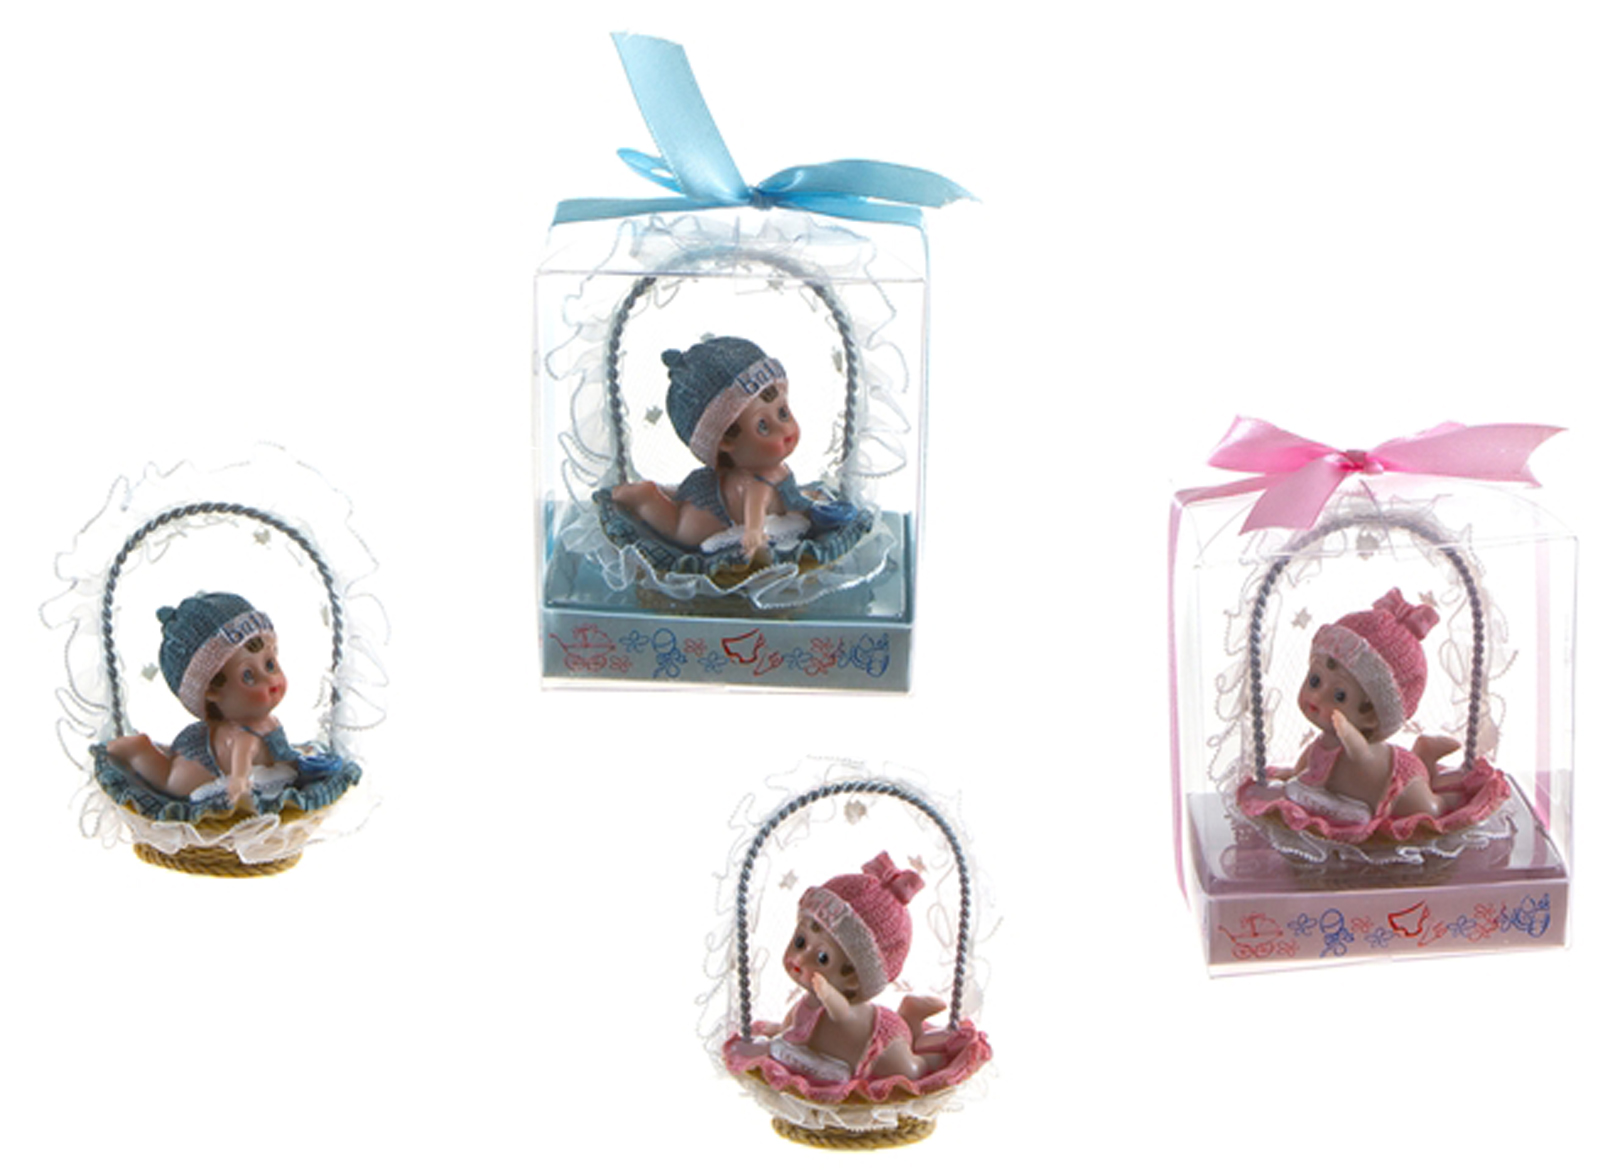 Gender Reveal Baby Crawling in BASKET Party Favors w/ Designer GIFT Box - Choose Your Color(s)